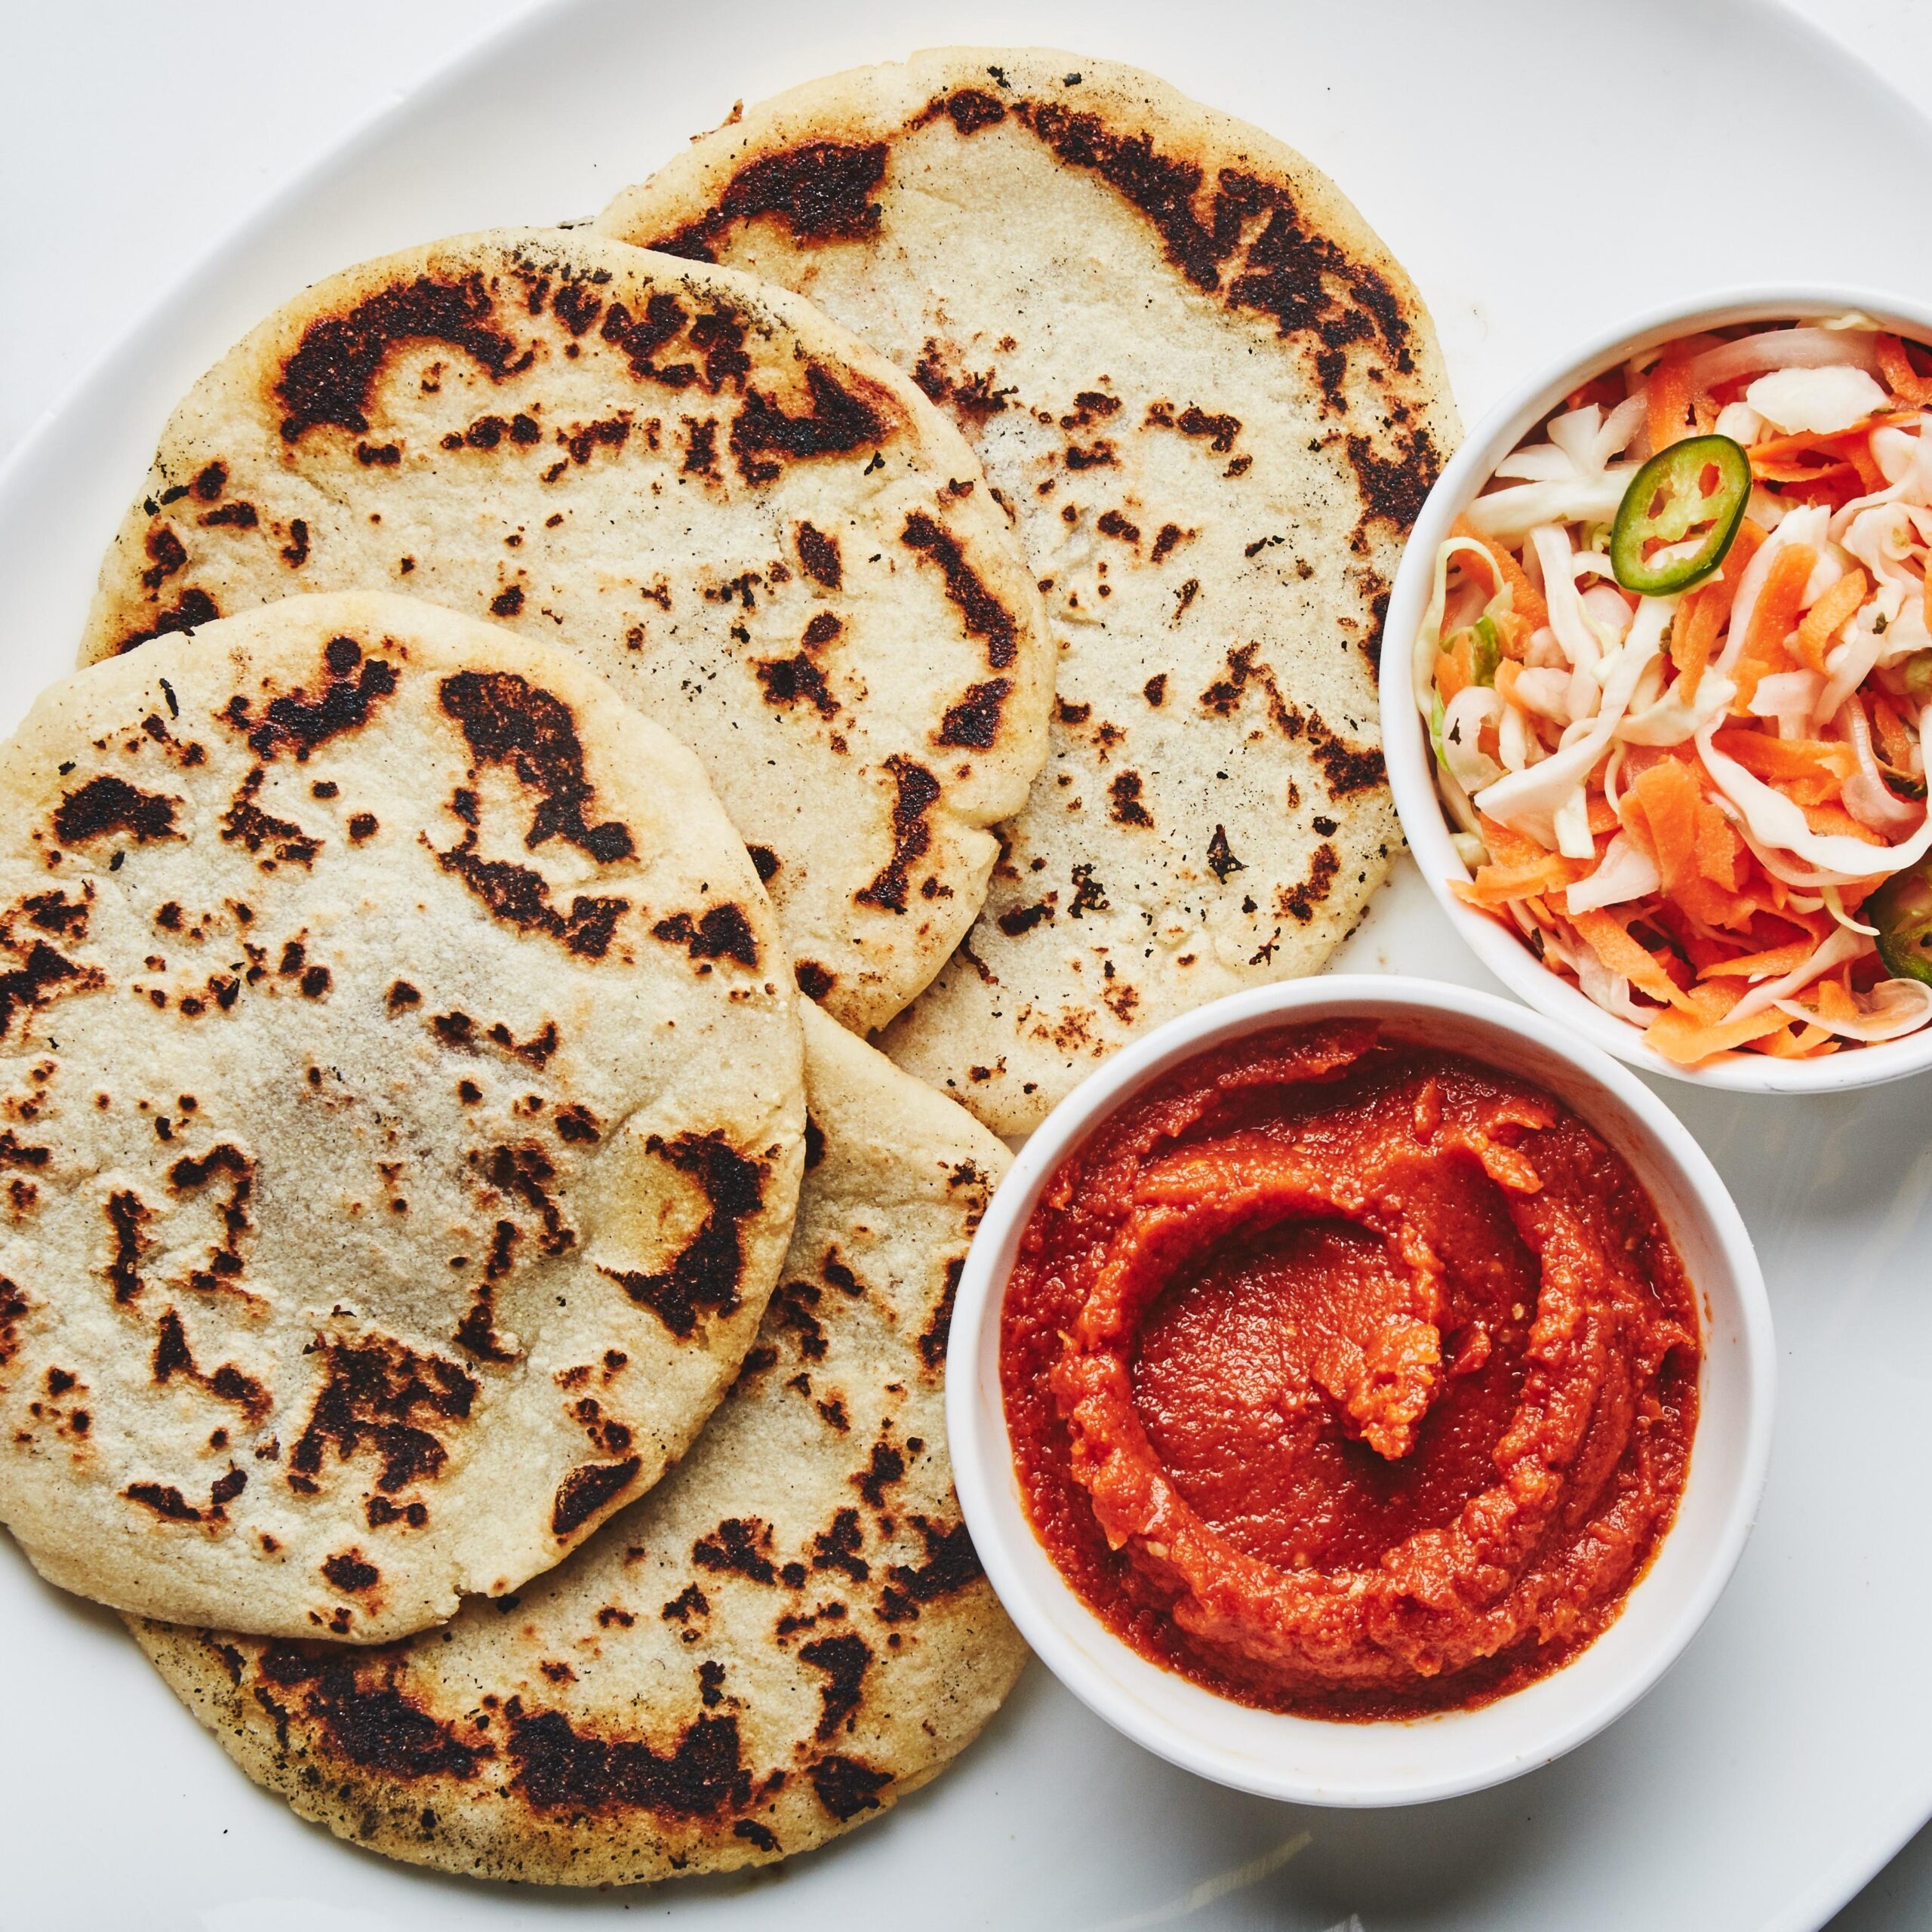  Experience the authentic taste of El Salvador with these pupusas!